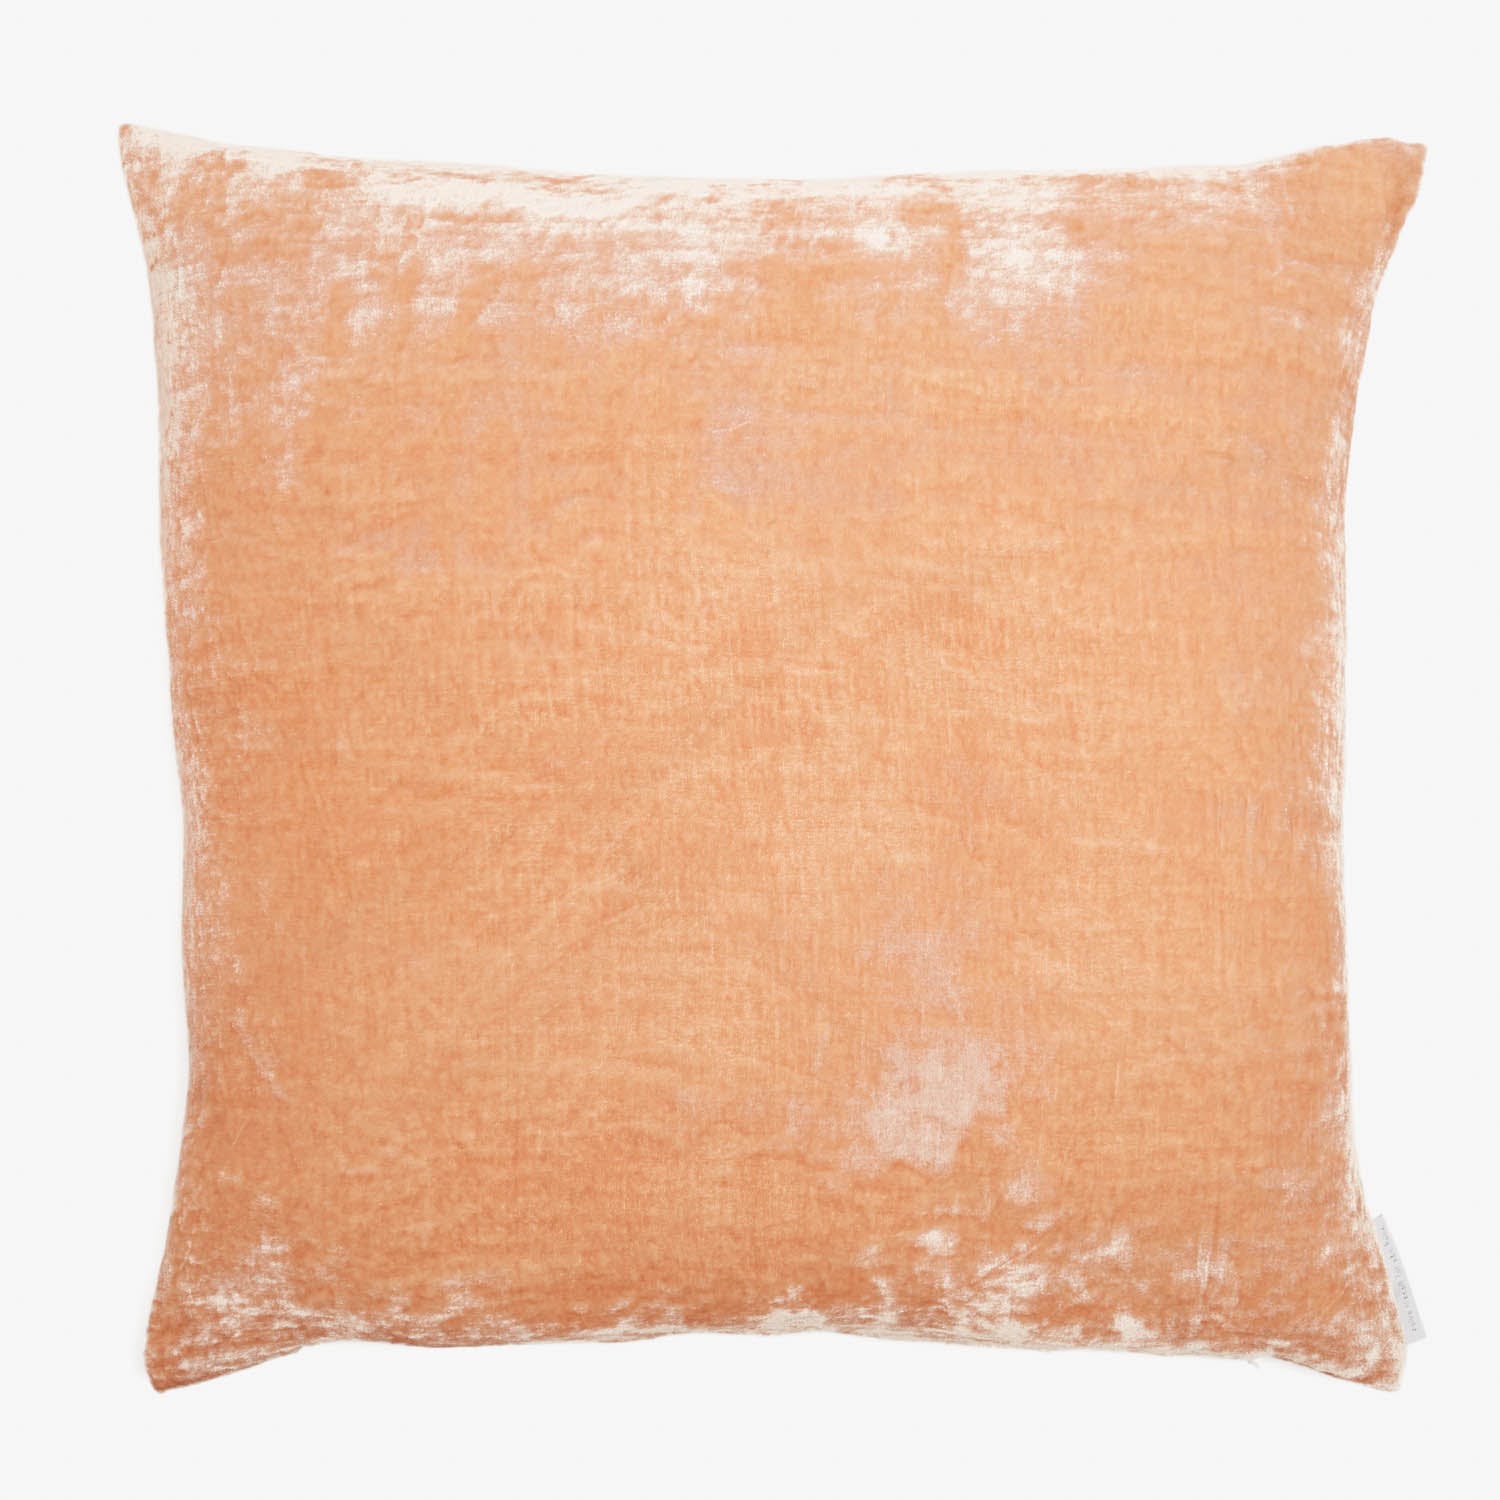 Peach-colored square pillow with distressed finish and clean design.